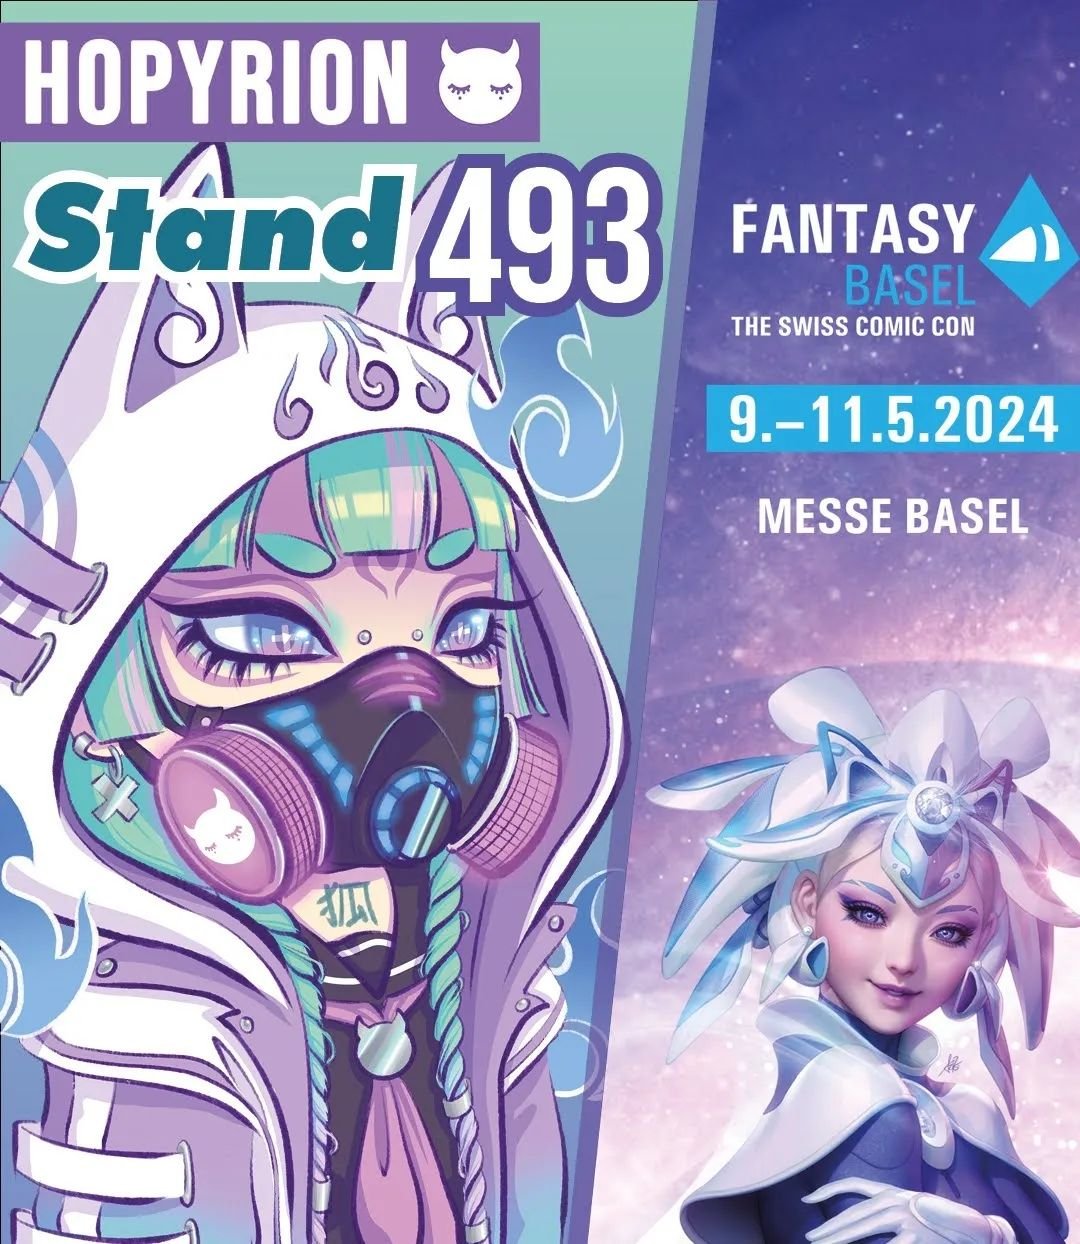 I'll be at @fantasybasel next week! 💜✨

📍 Stand 493 in Hall 2.1 close to the East entrance 

Looking forward to be in the Artist Alley here!
Please say hi if you're there 💖

#fantasybasel #swisscomiccon